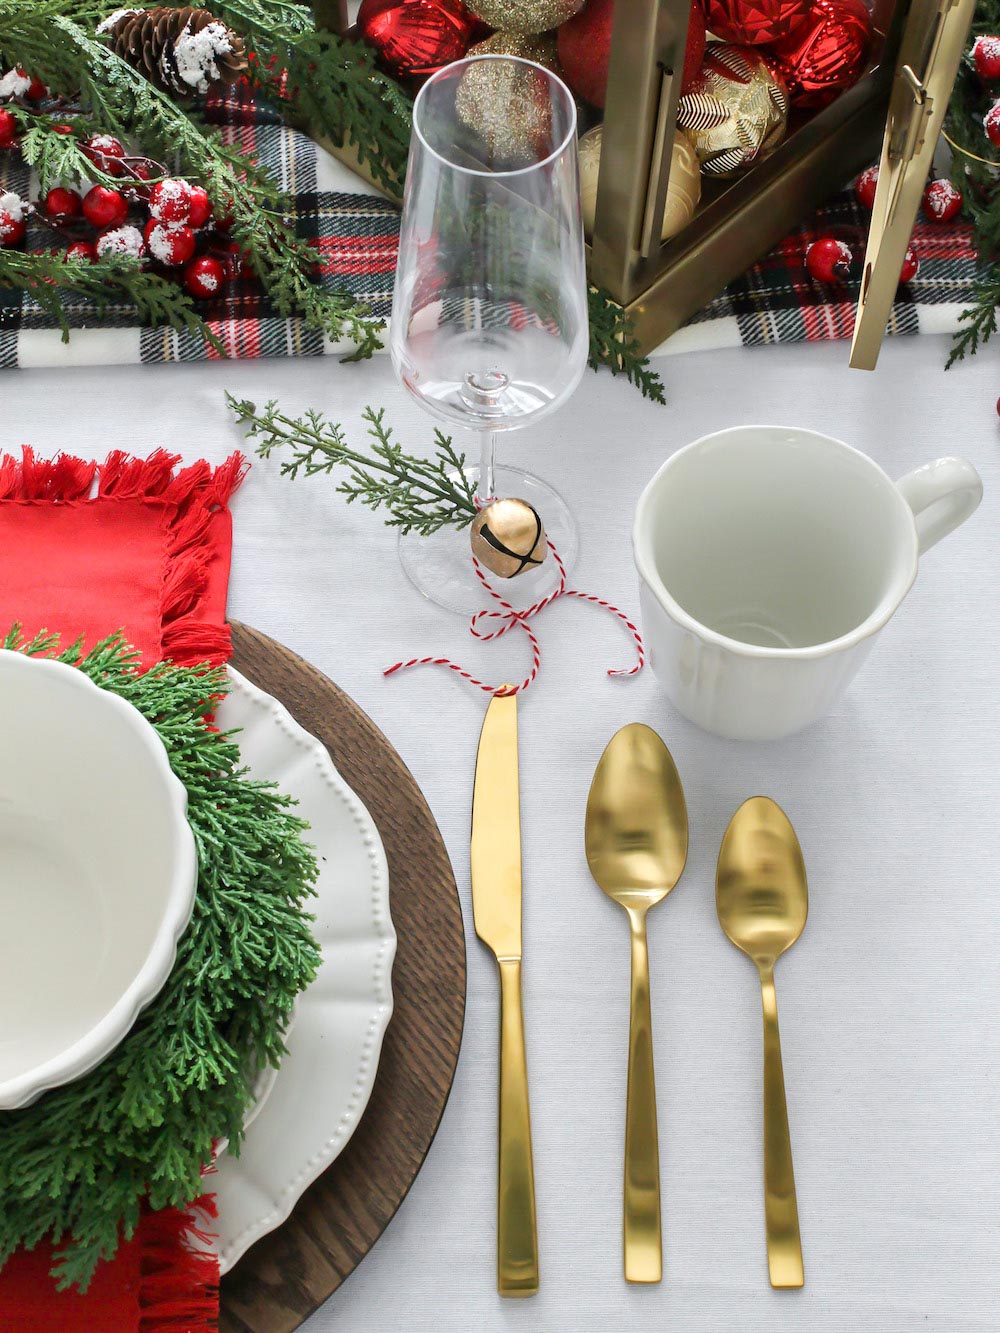 Ariel shot of decorated table containing gold cutlery, a wine glass, a coffee mug and holiday themed plates and bowls